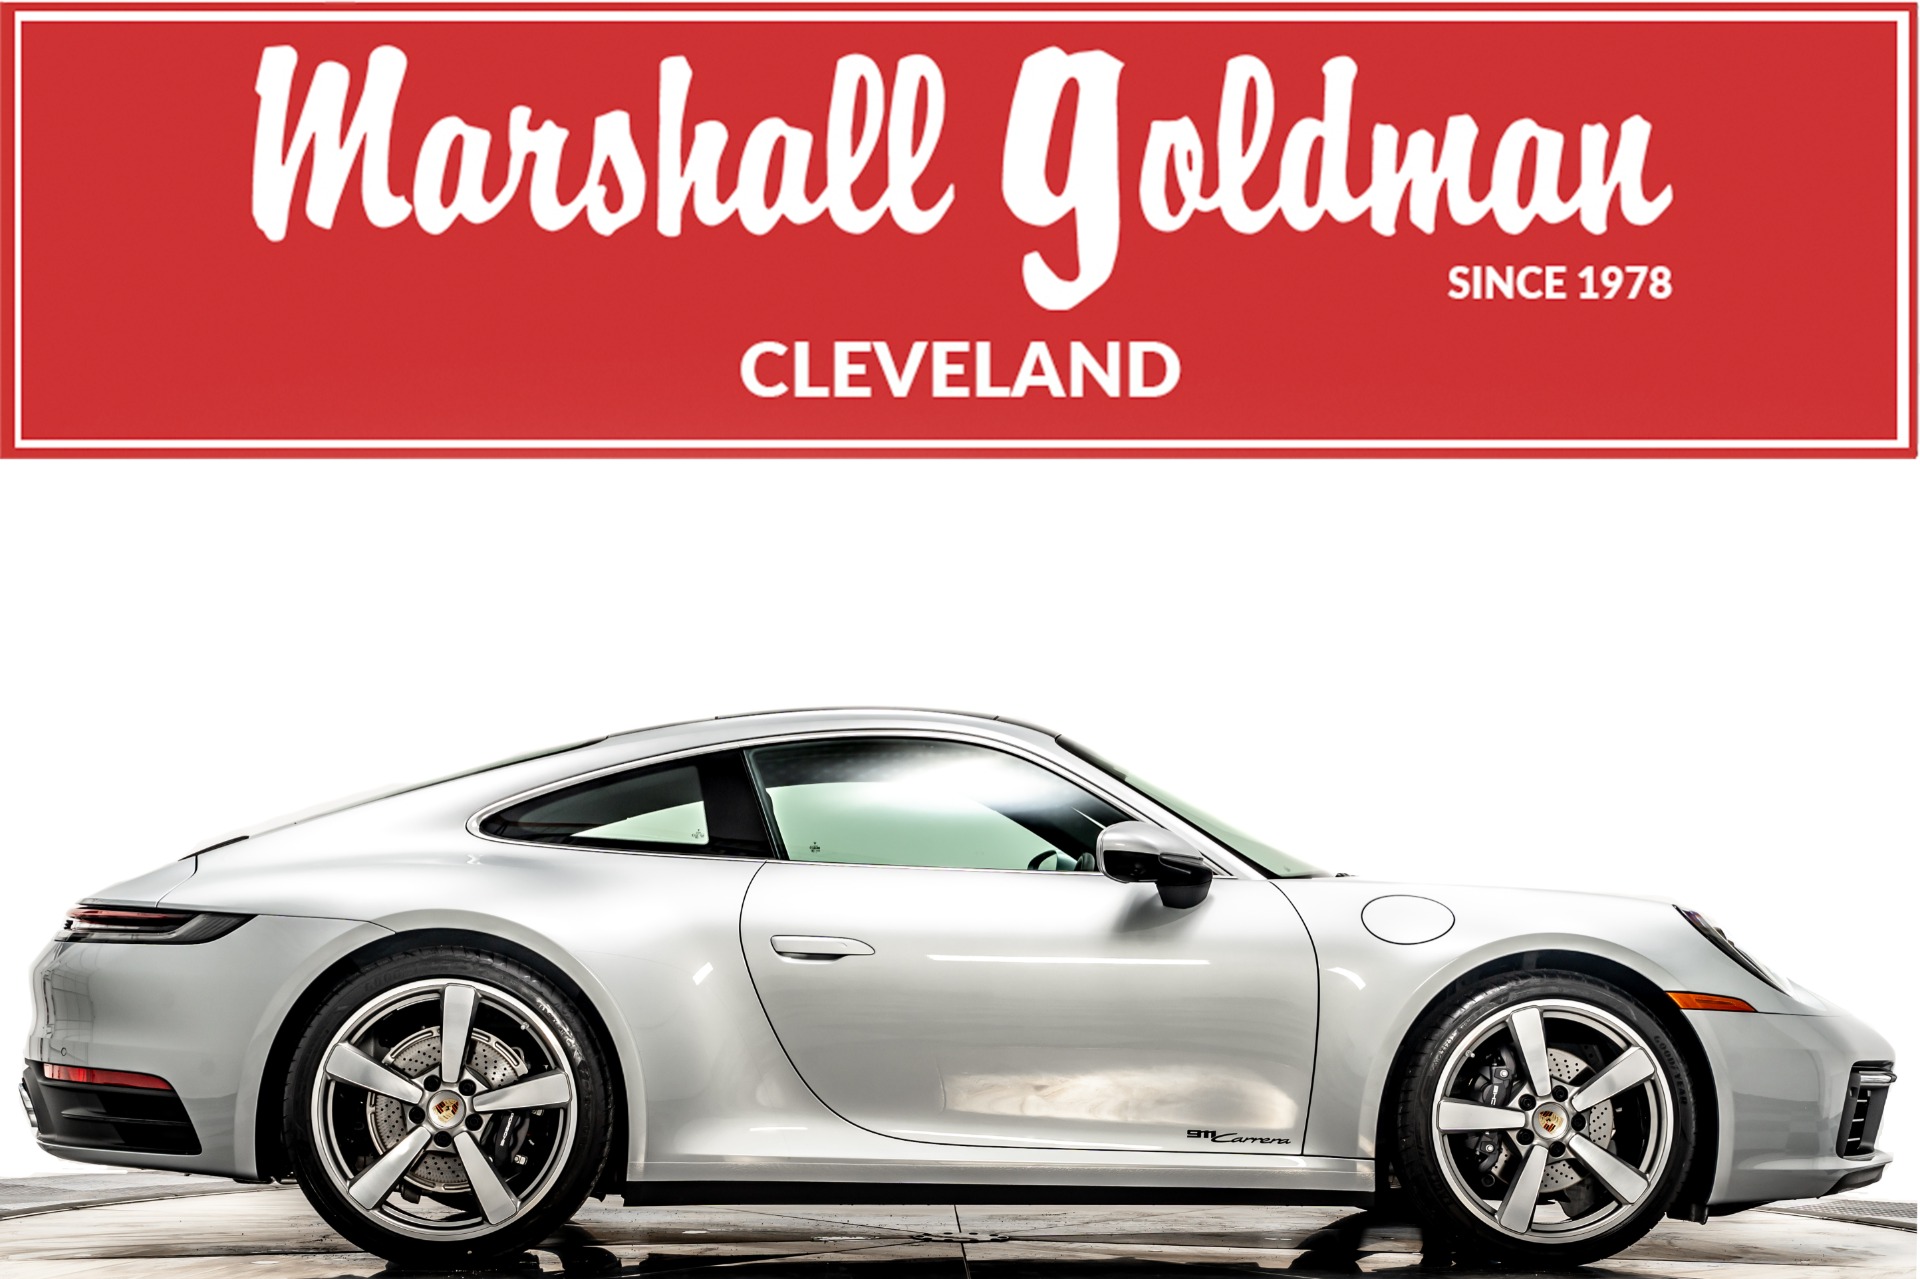 Used 2021 Porsche 911 Carrera For Sale (Sold) | Marshall Goldman Cleveland  Stock #W22315